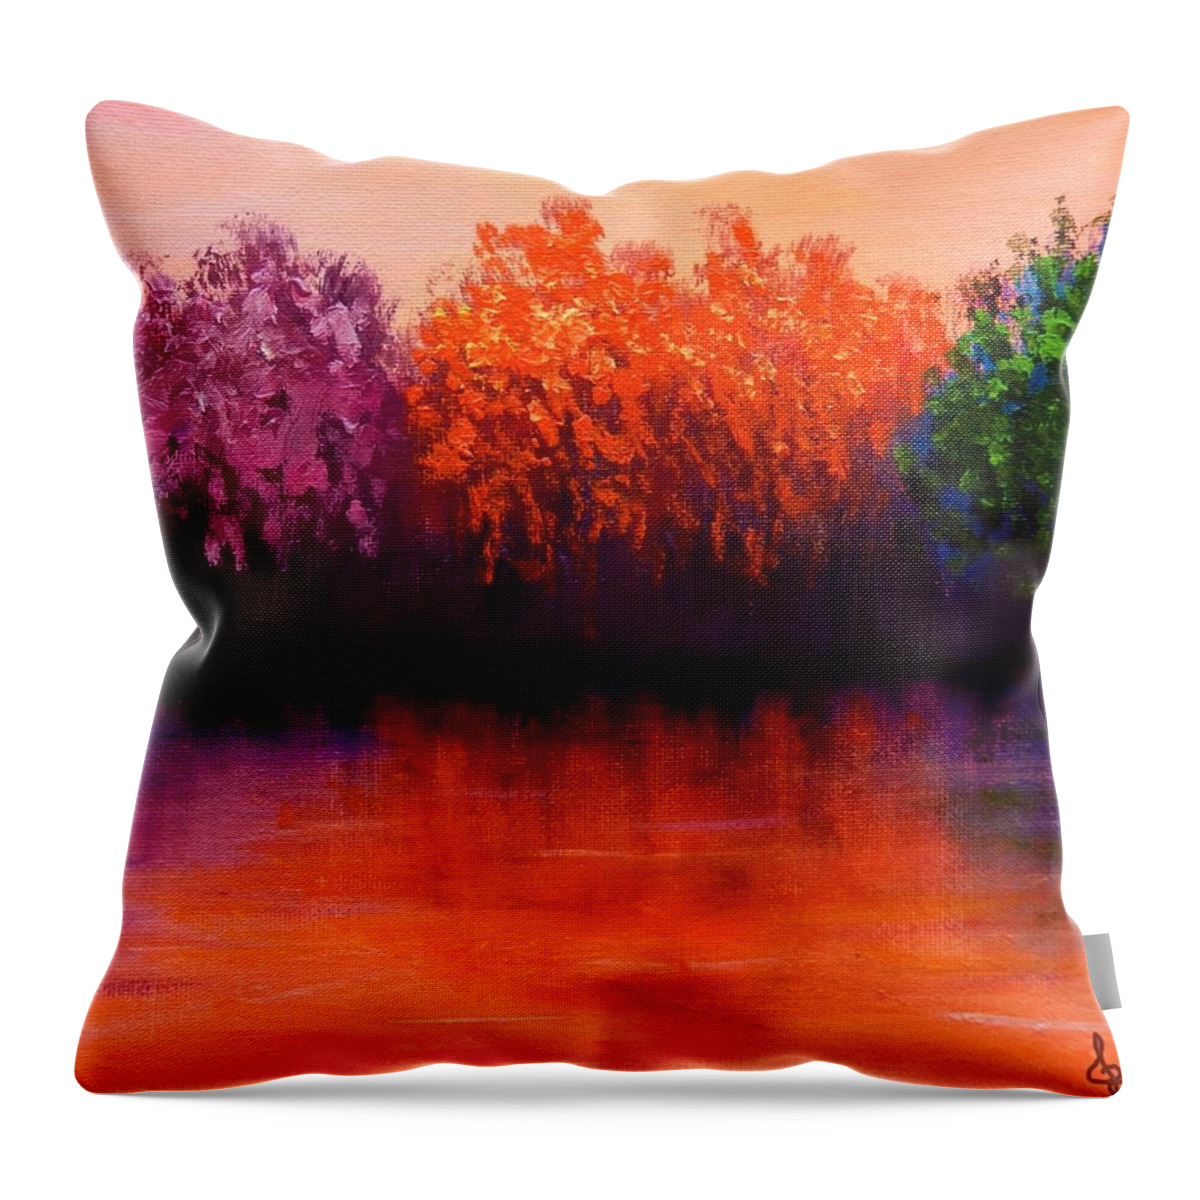 Seasons Throw Pillow featuring the painting Colorful Seasons by Lilia S